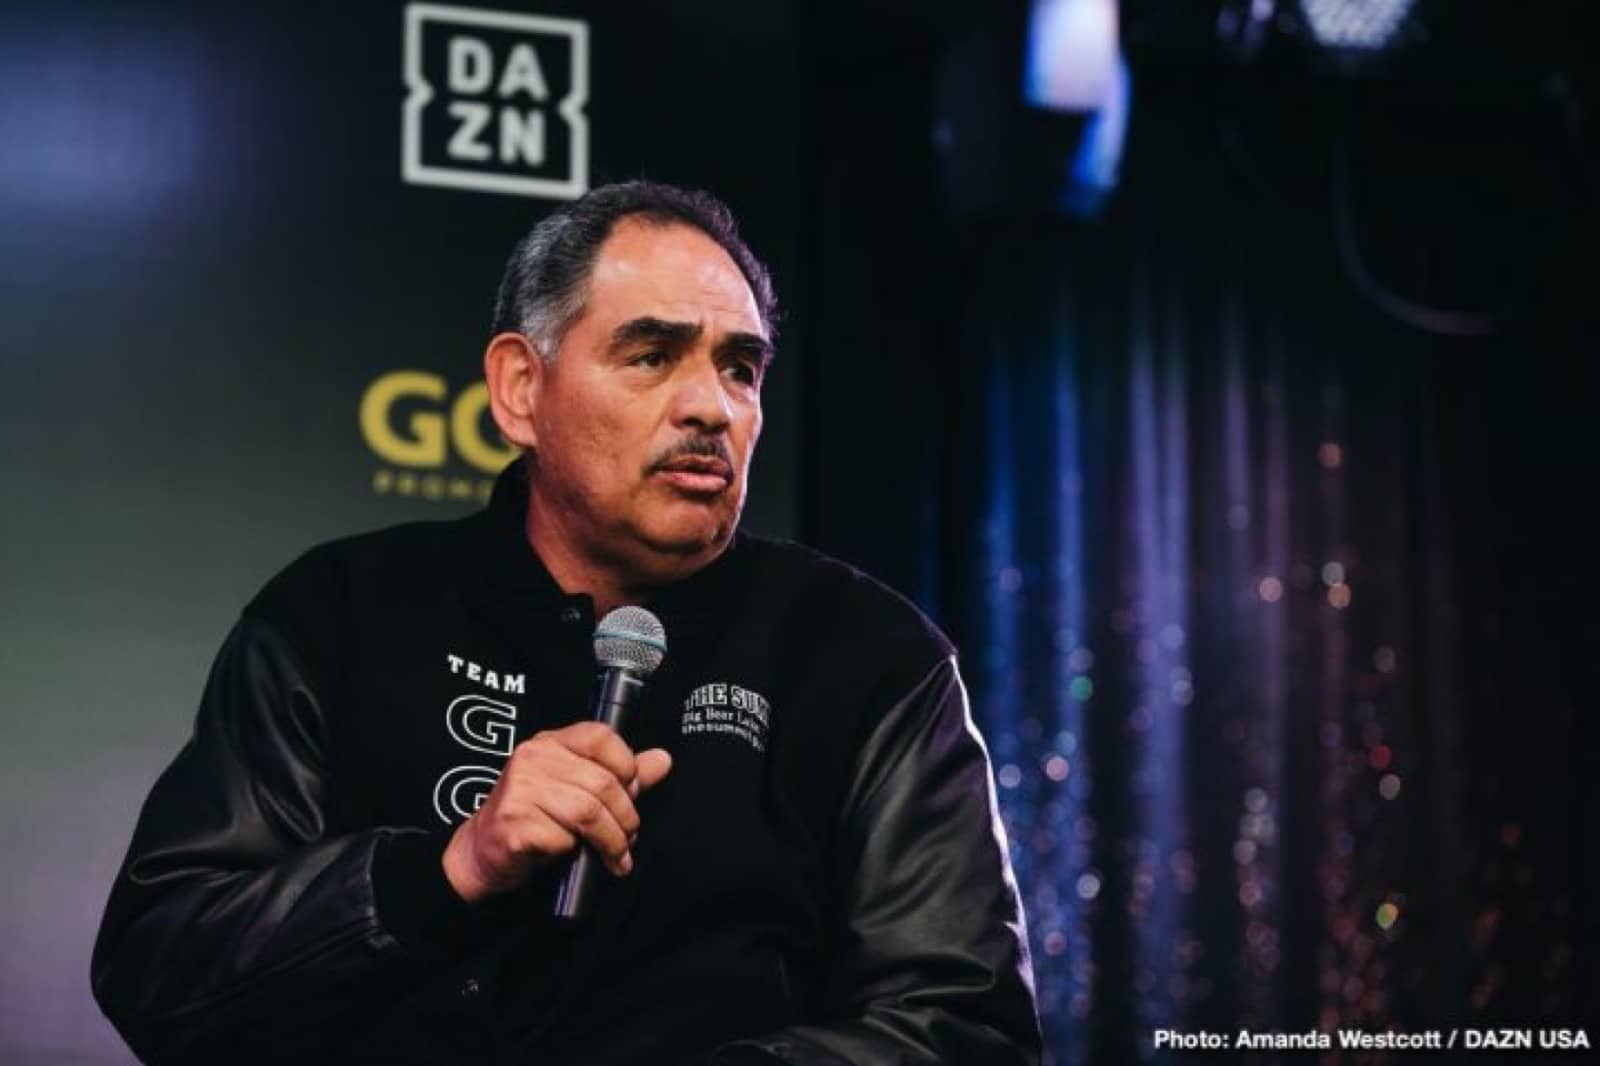 Abel Sanchez: “To Beat Canelo, Golovkin Has To Walk Him Down, Not Try And Be A Boxer”